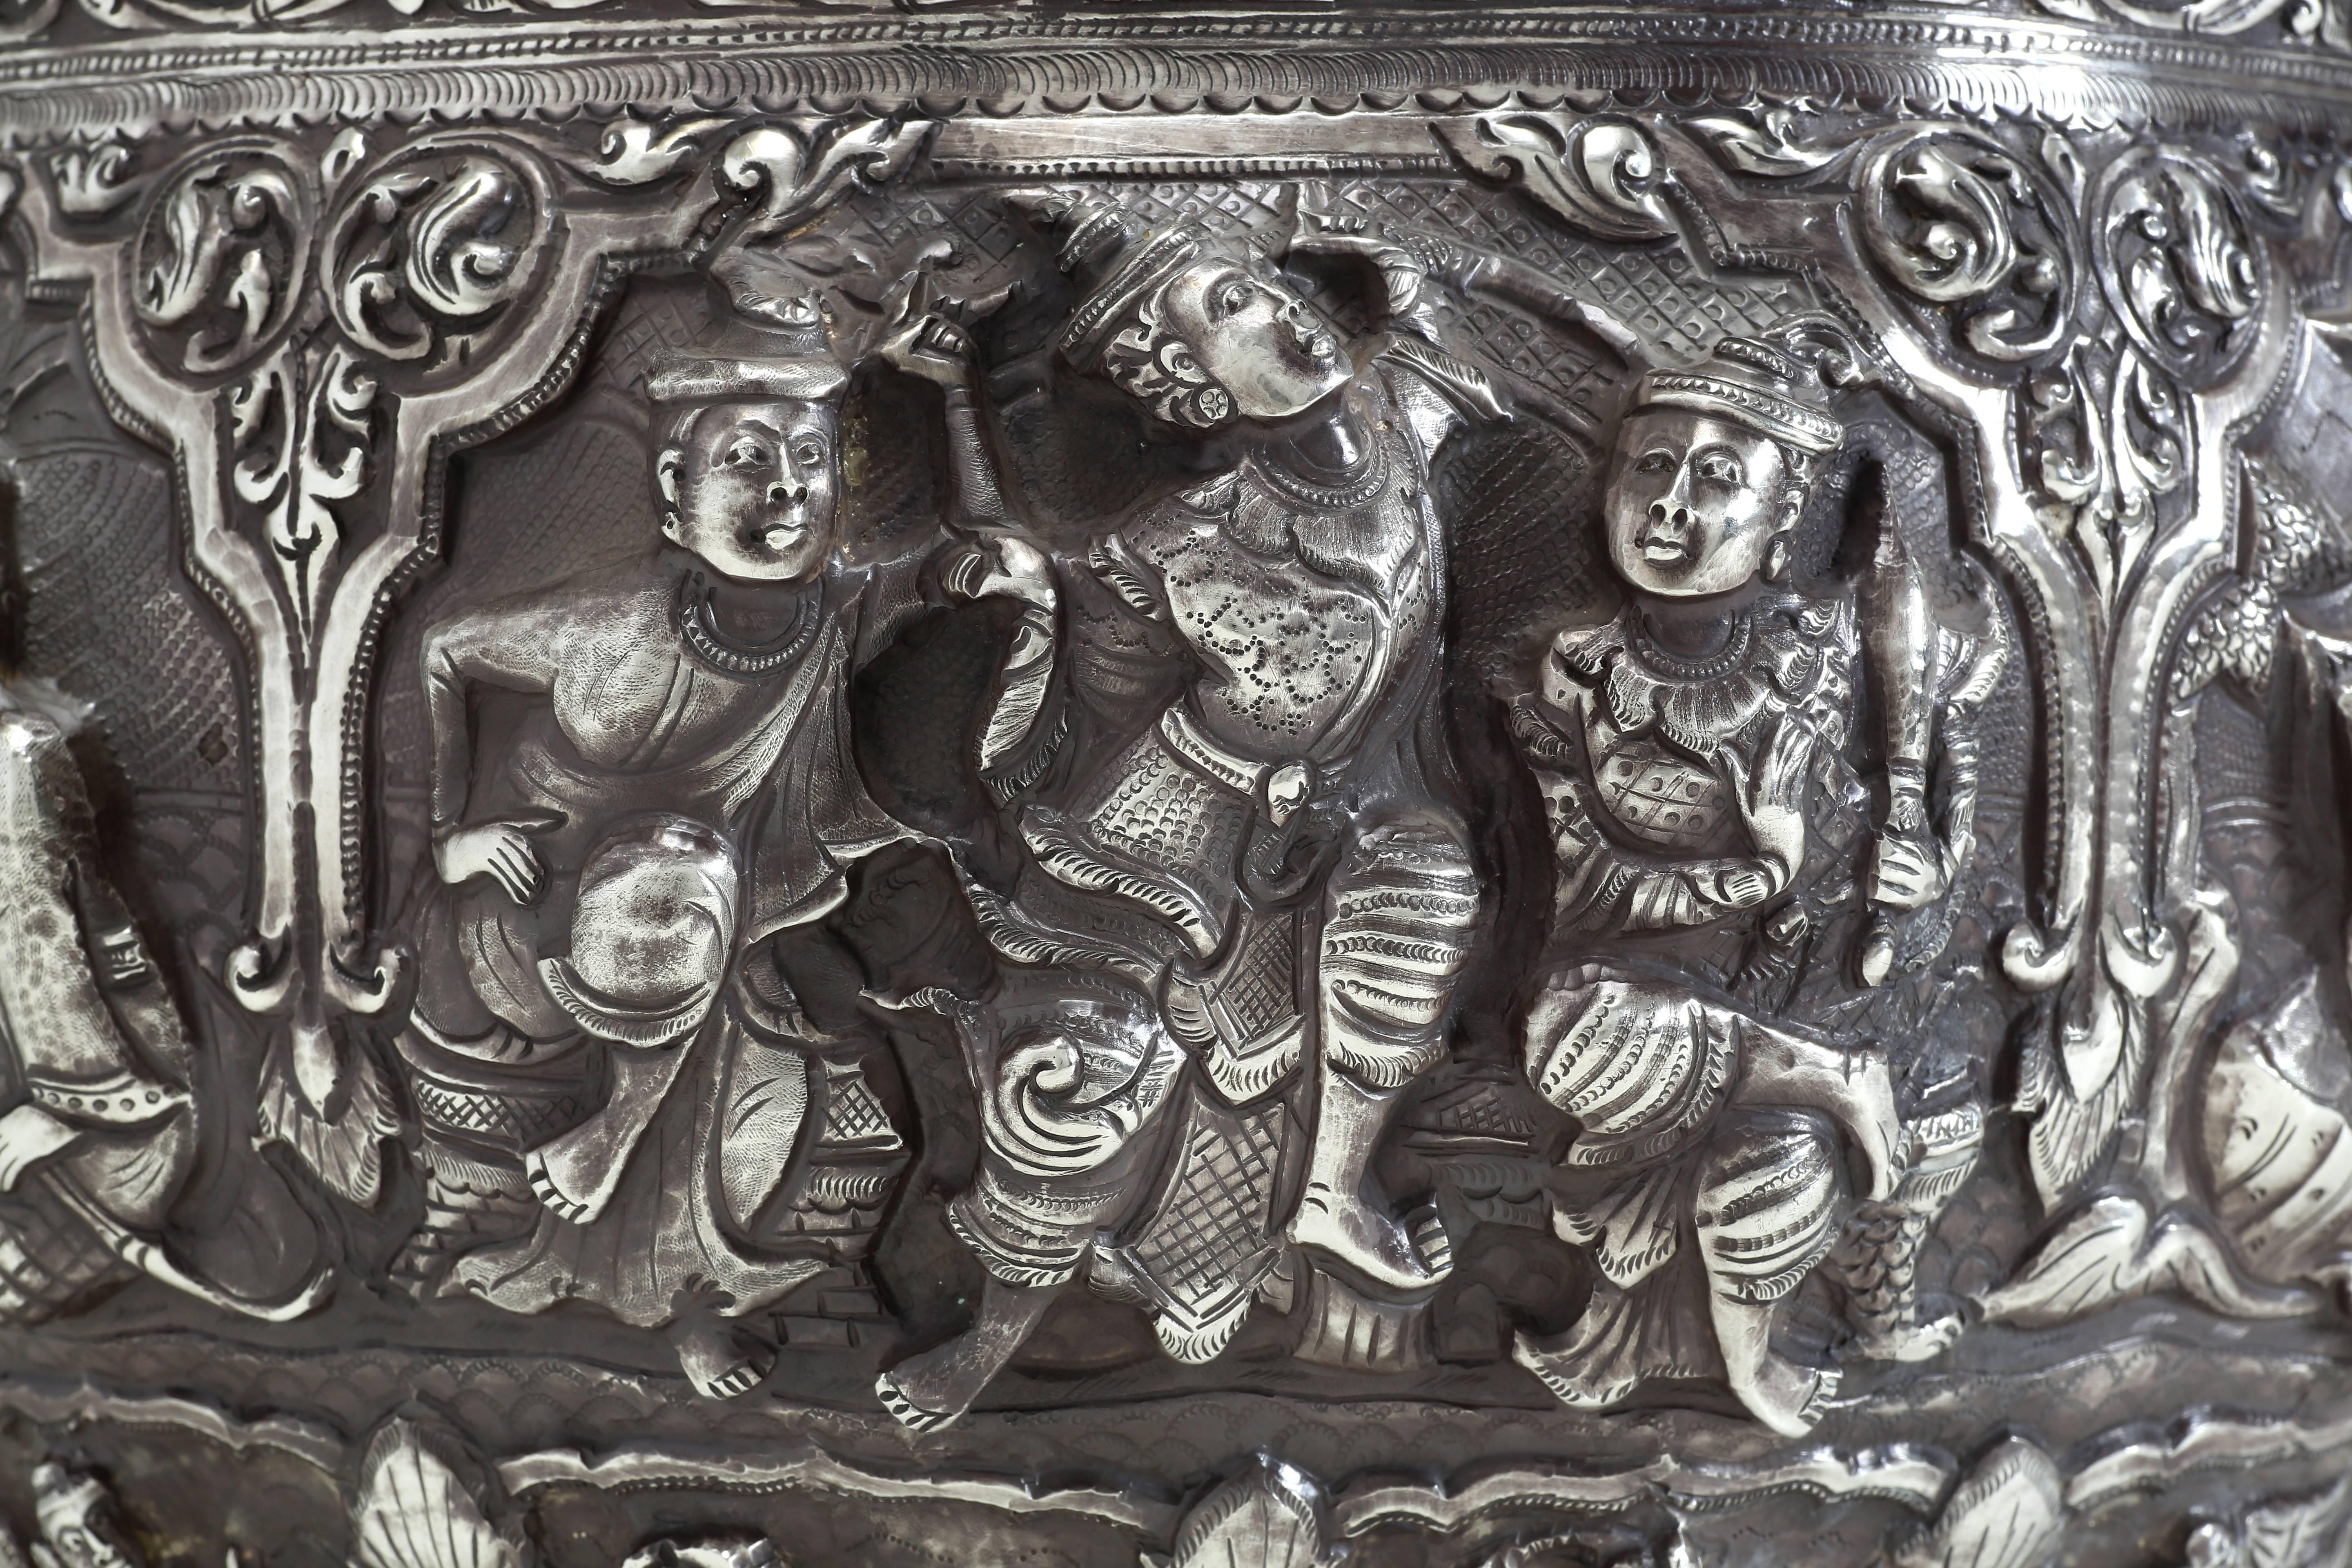 The silver bowl with finely chased details in high relief depicts characters from the Jataka tales. These tales are moralistic tales, either from the lives of the Buddha or parables taught by Buddha. The rim of the bowl is finely engraved with